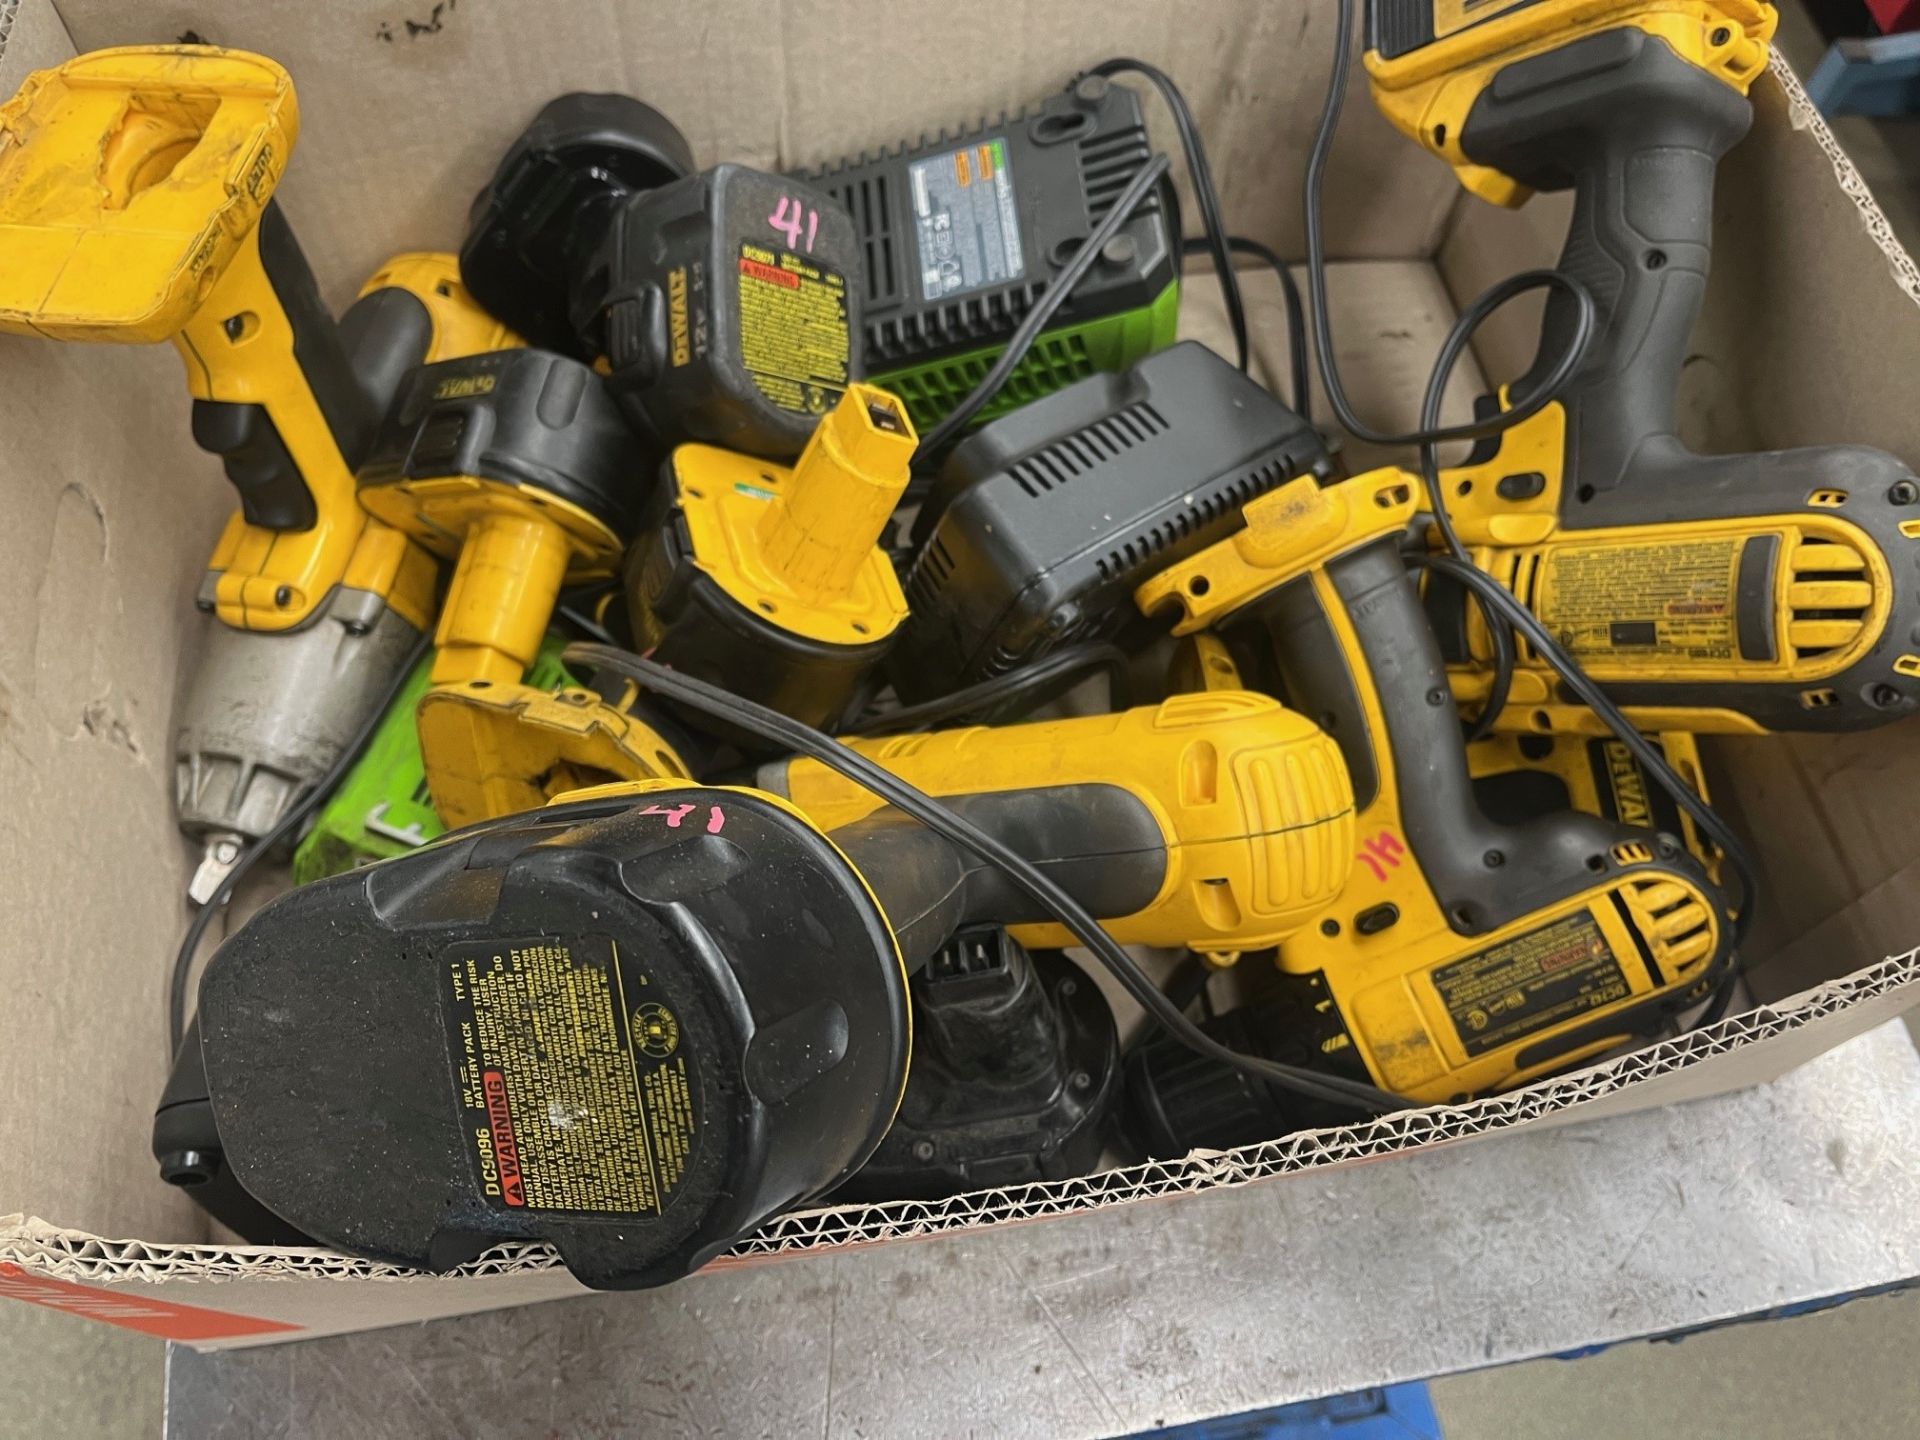 ASSORTED DEWALT CORDLESS DRILLS WITH BATTERY CHARGERS - Image 4 of 4